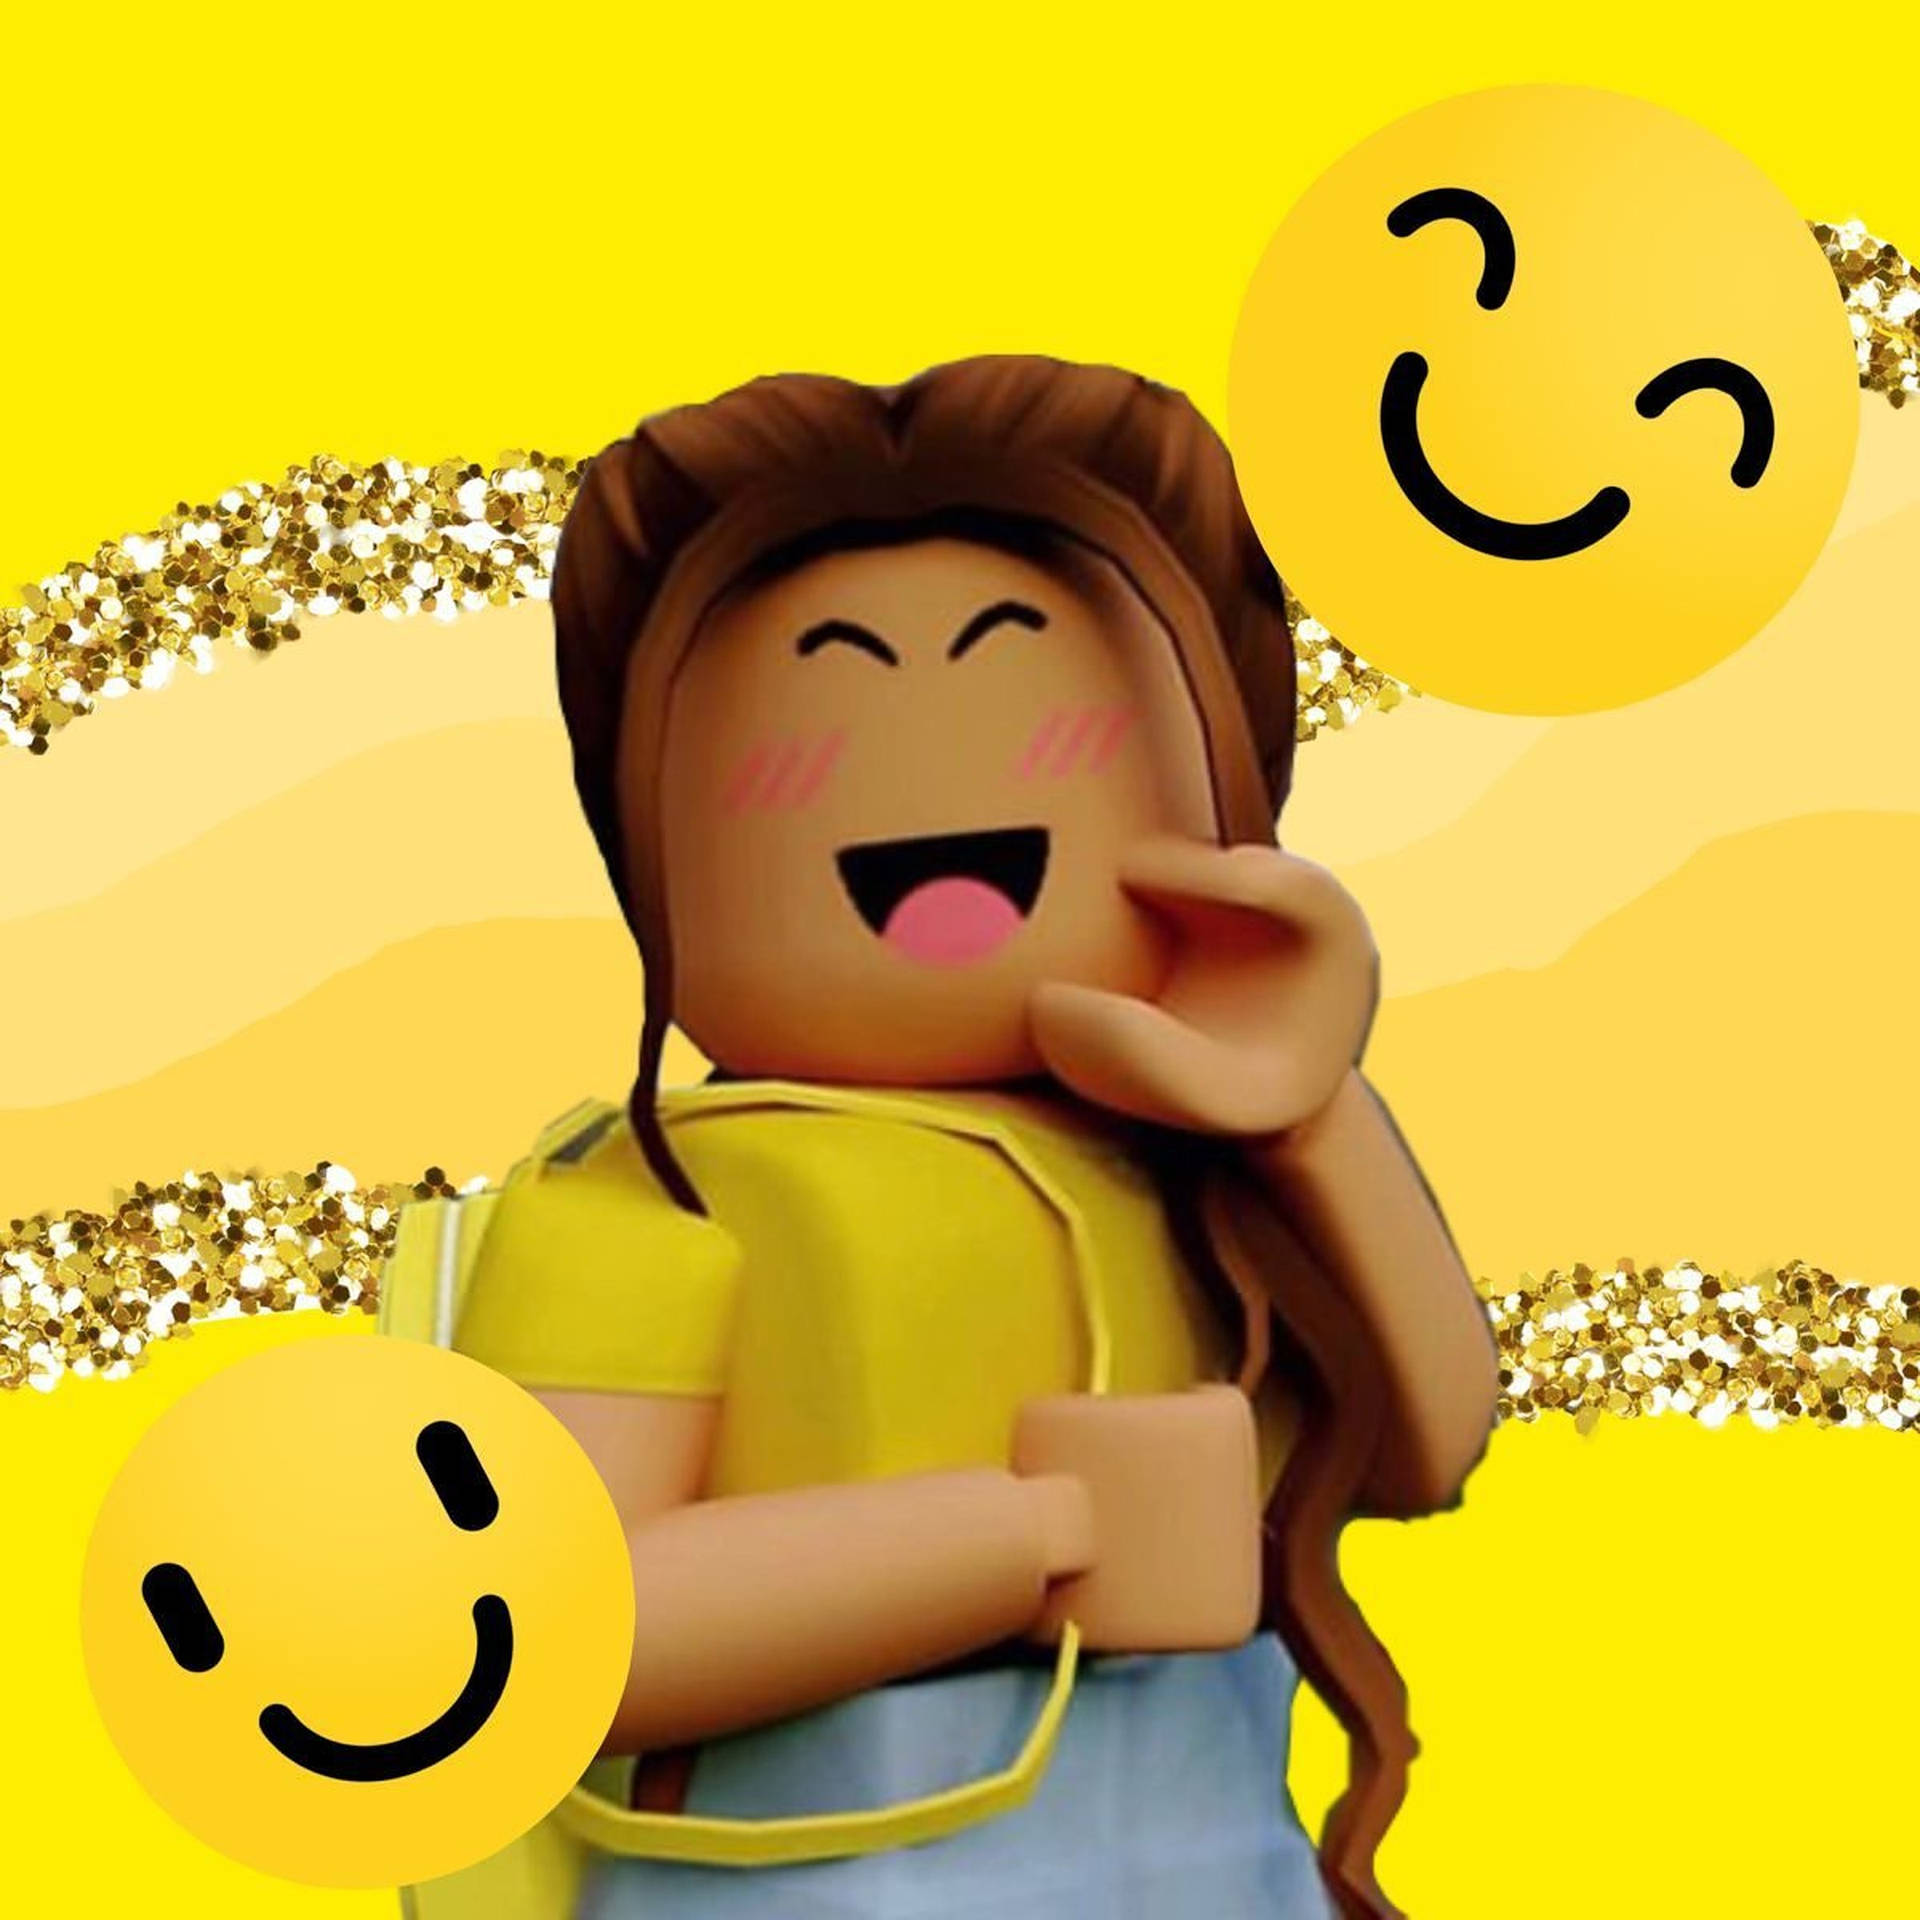 Download Roblox Girl With Smiley Emoji Wallpaper | Wallpapers.com